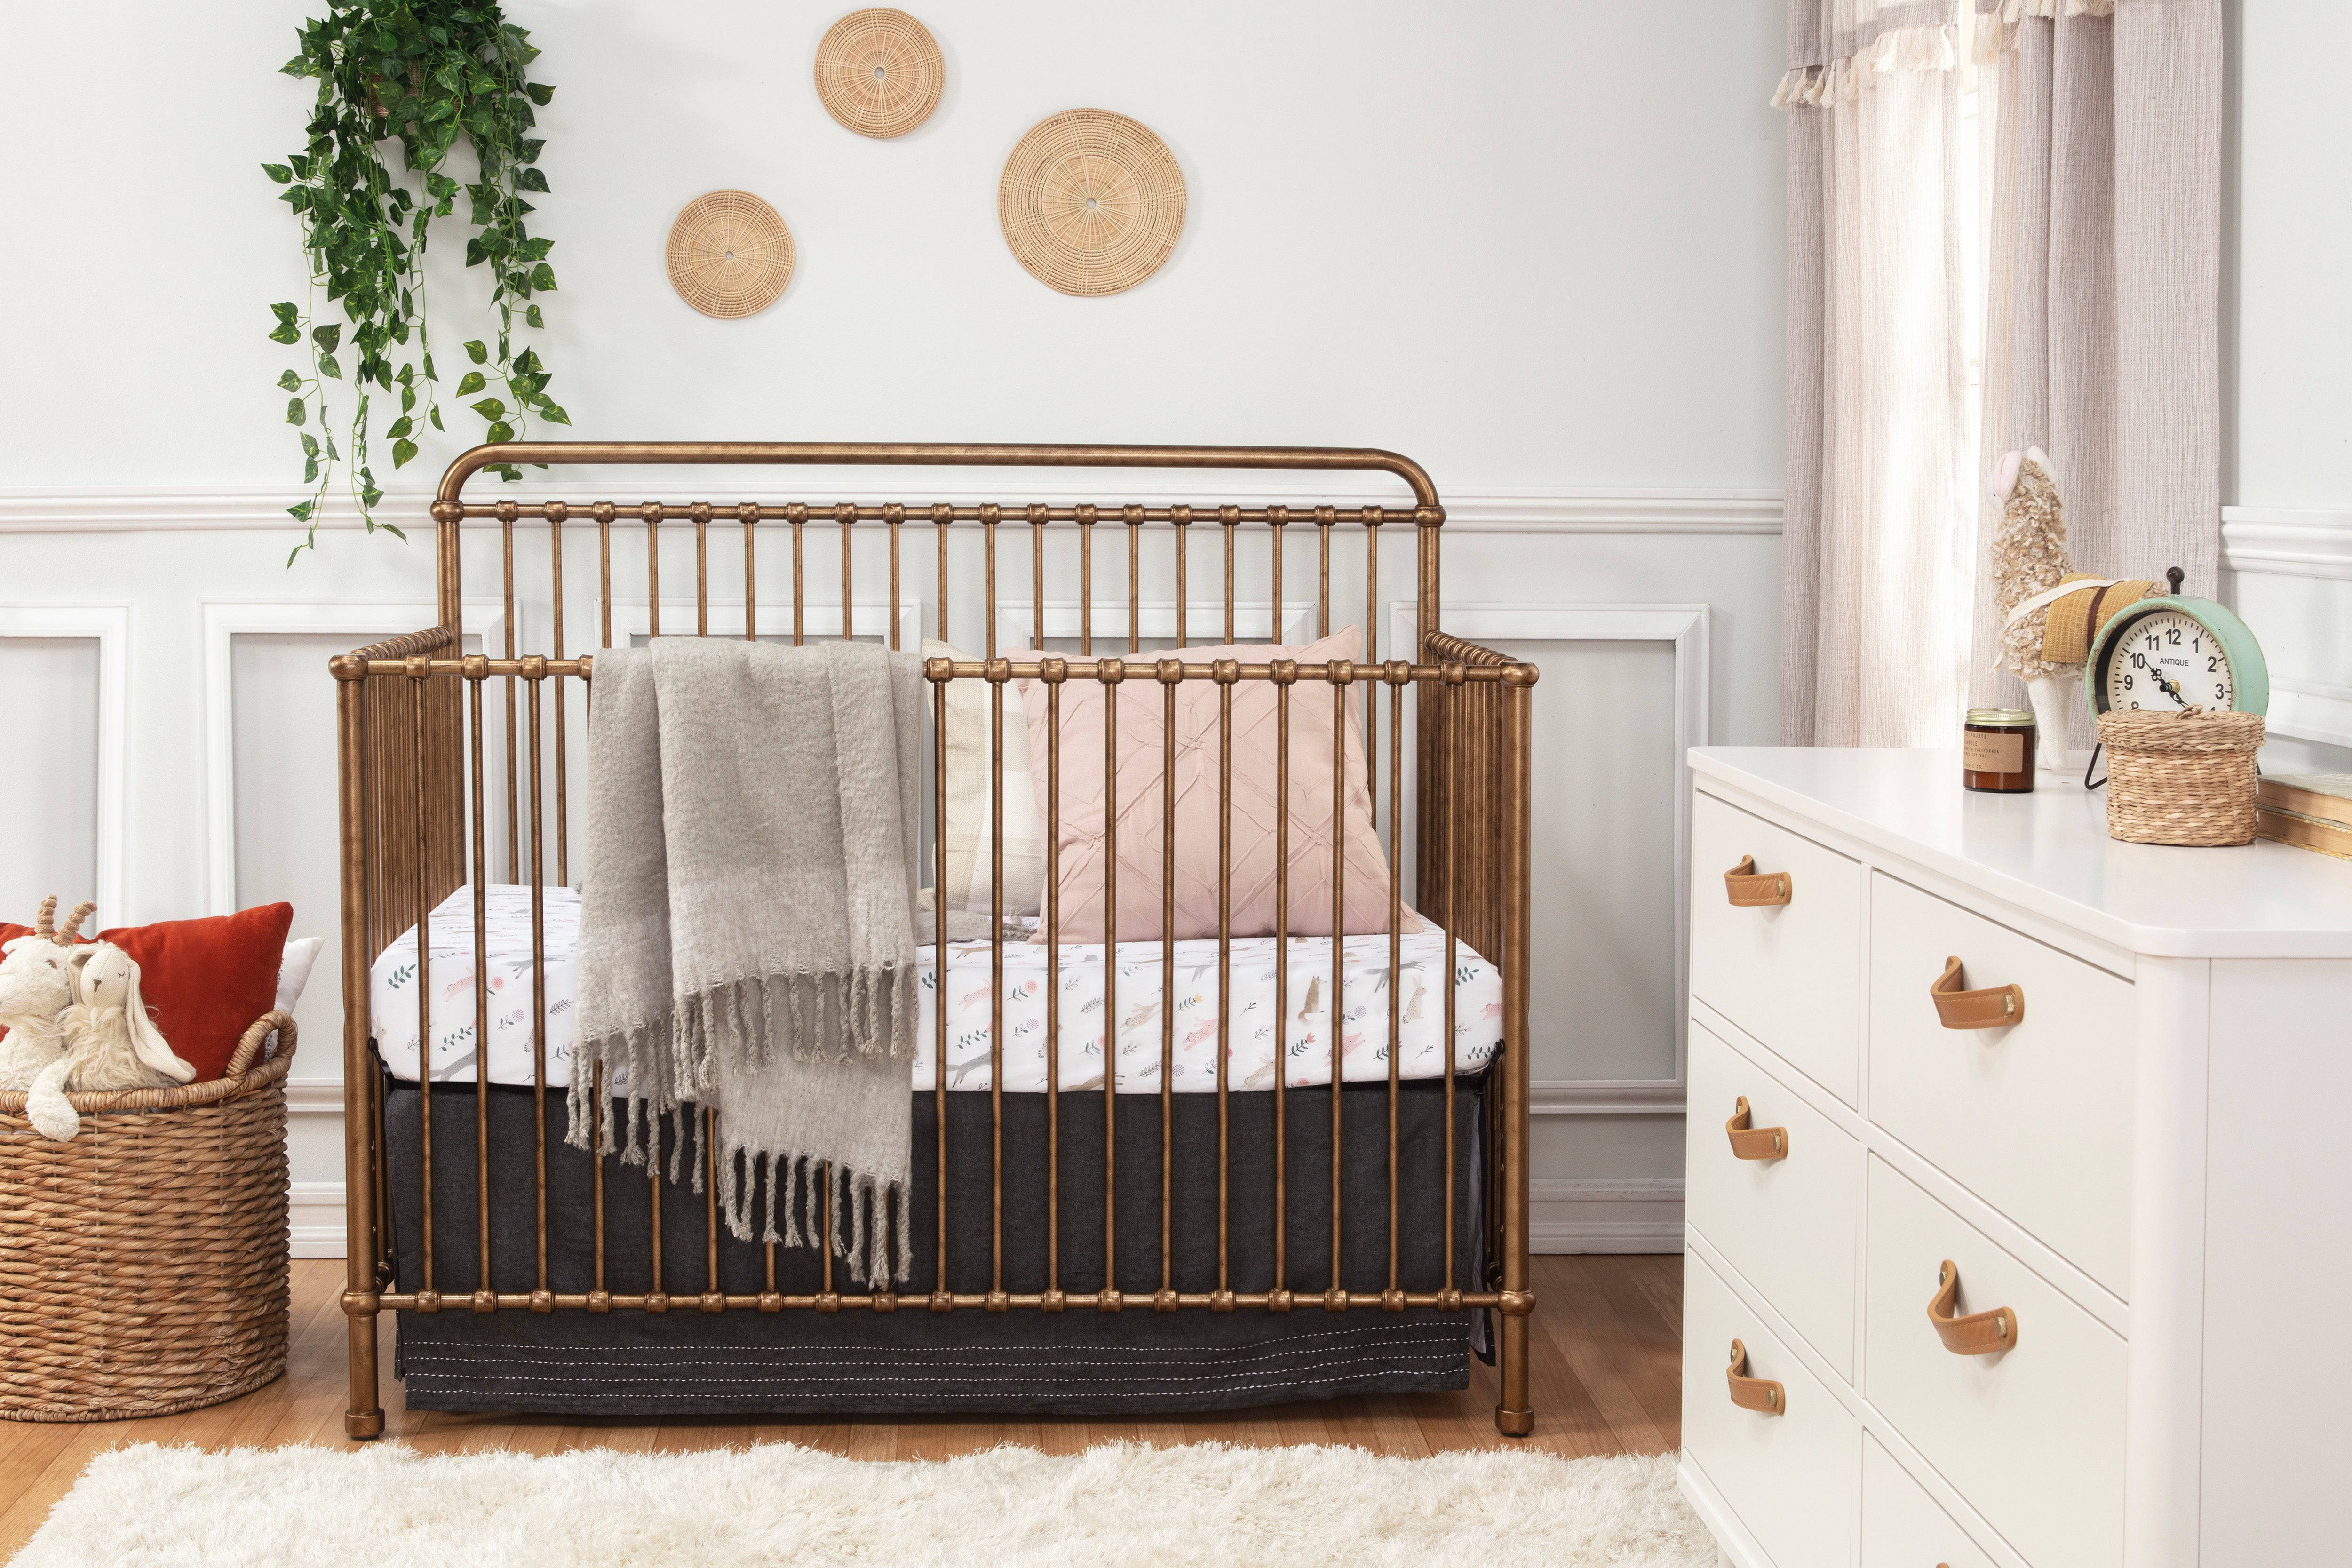 Winston 4-1 Convertible Crib in Vintage Gold - Twinkle Twinkle Little One